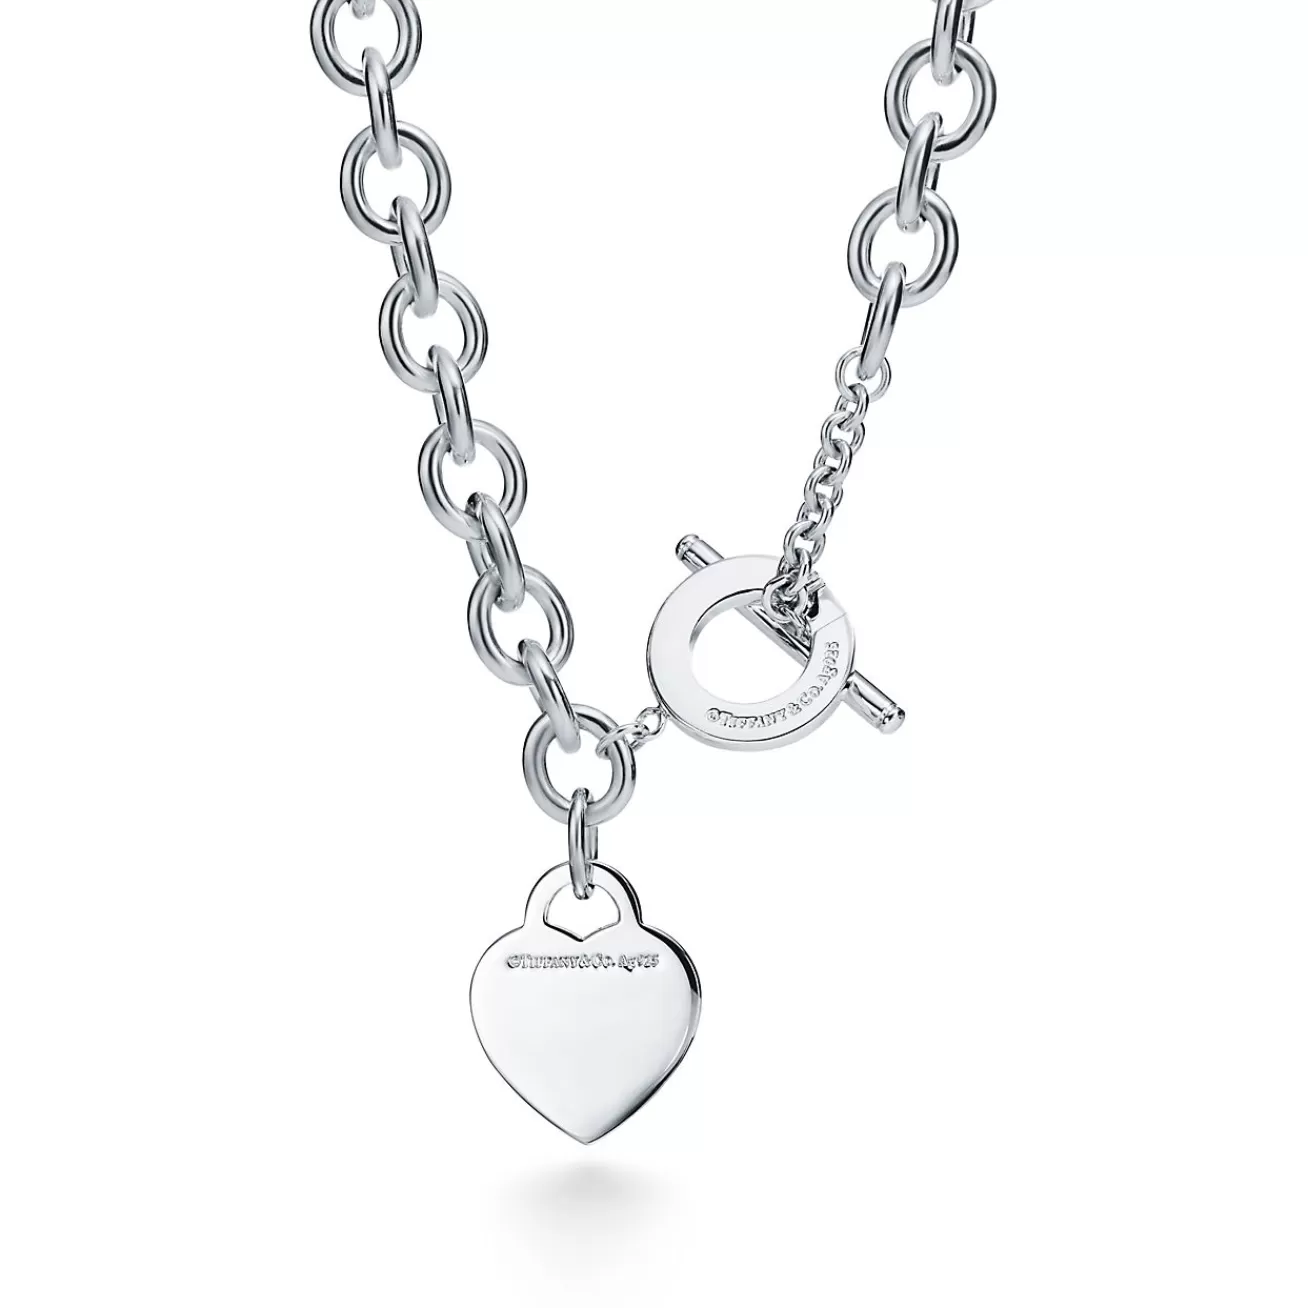 Tiffany & Co. Return to Tiffany® Heart Tag Toggle Necklace in Silver | ^ Necklaces & Pendants | Gifts for Her